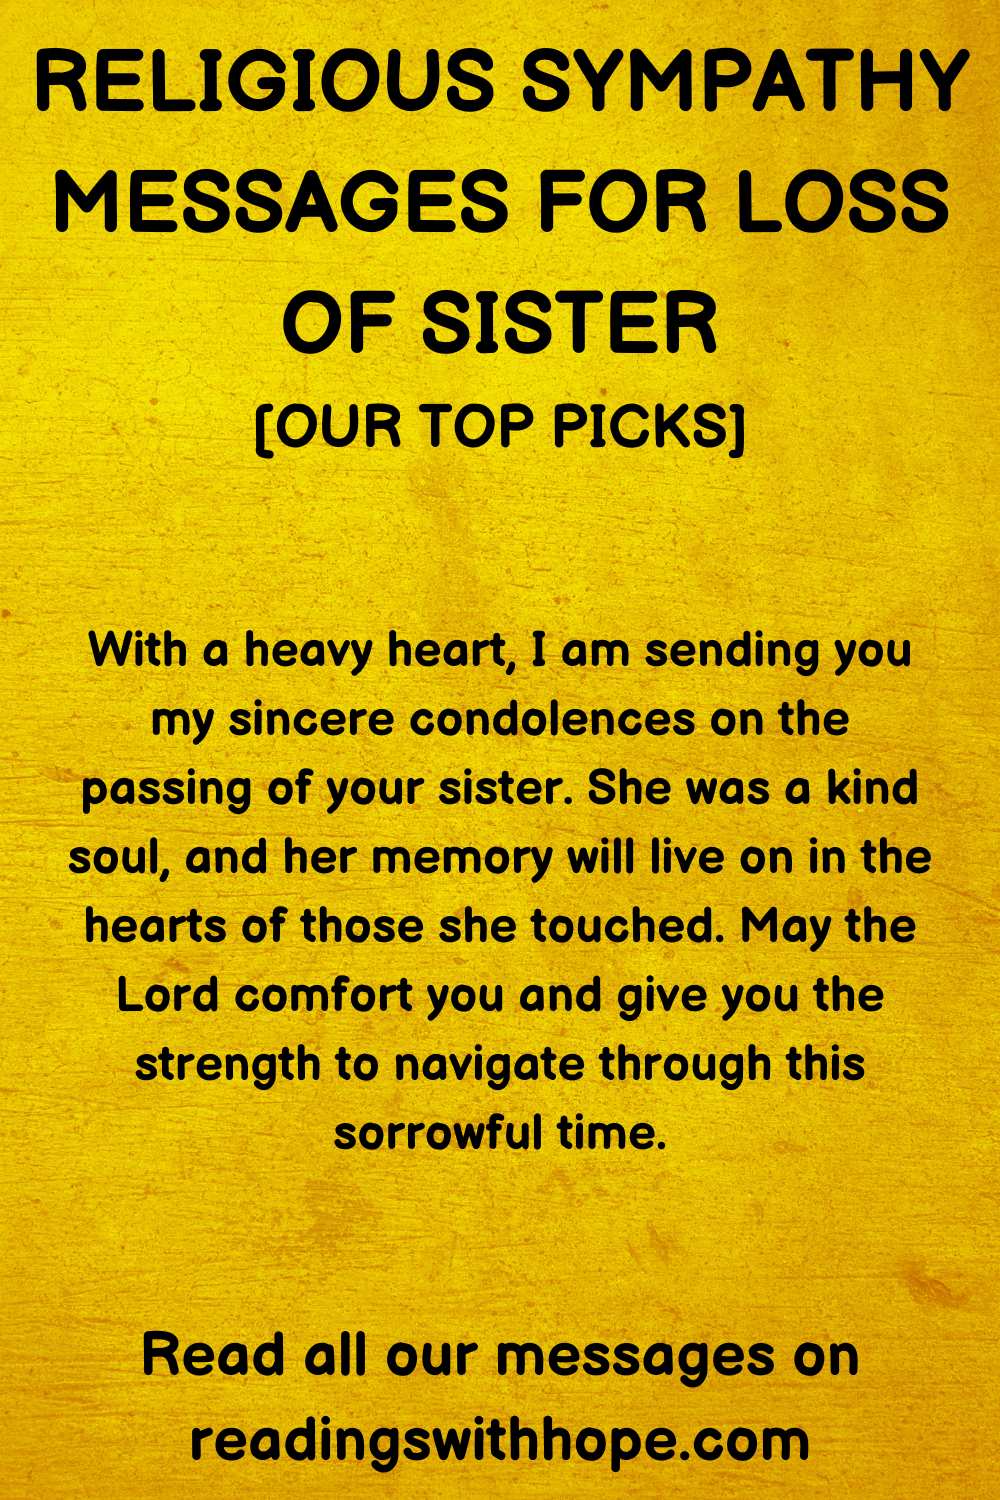 Religious sympathy message for loss of sister